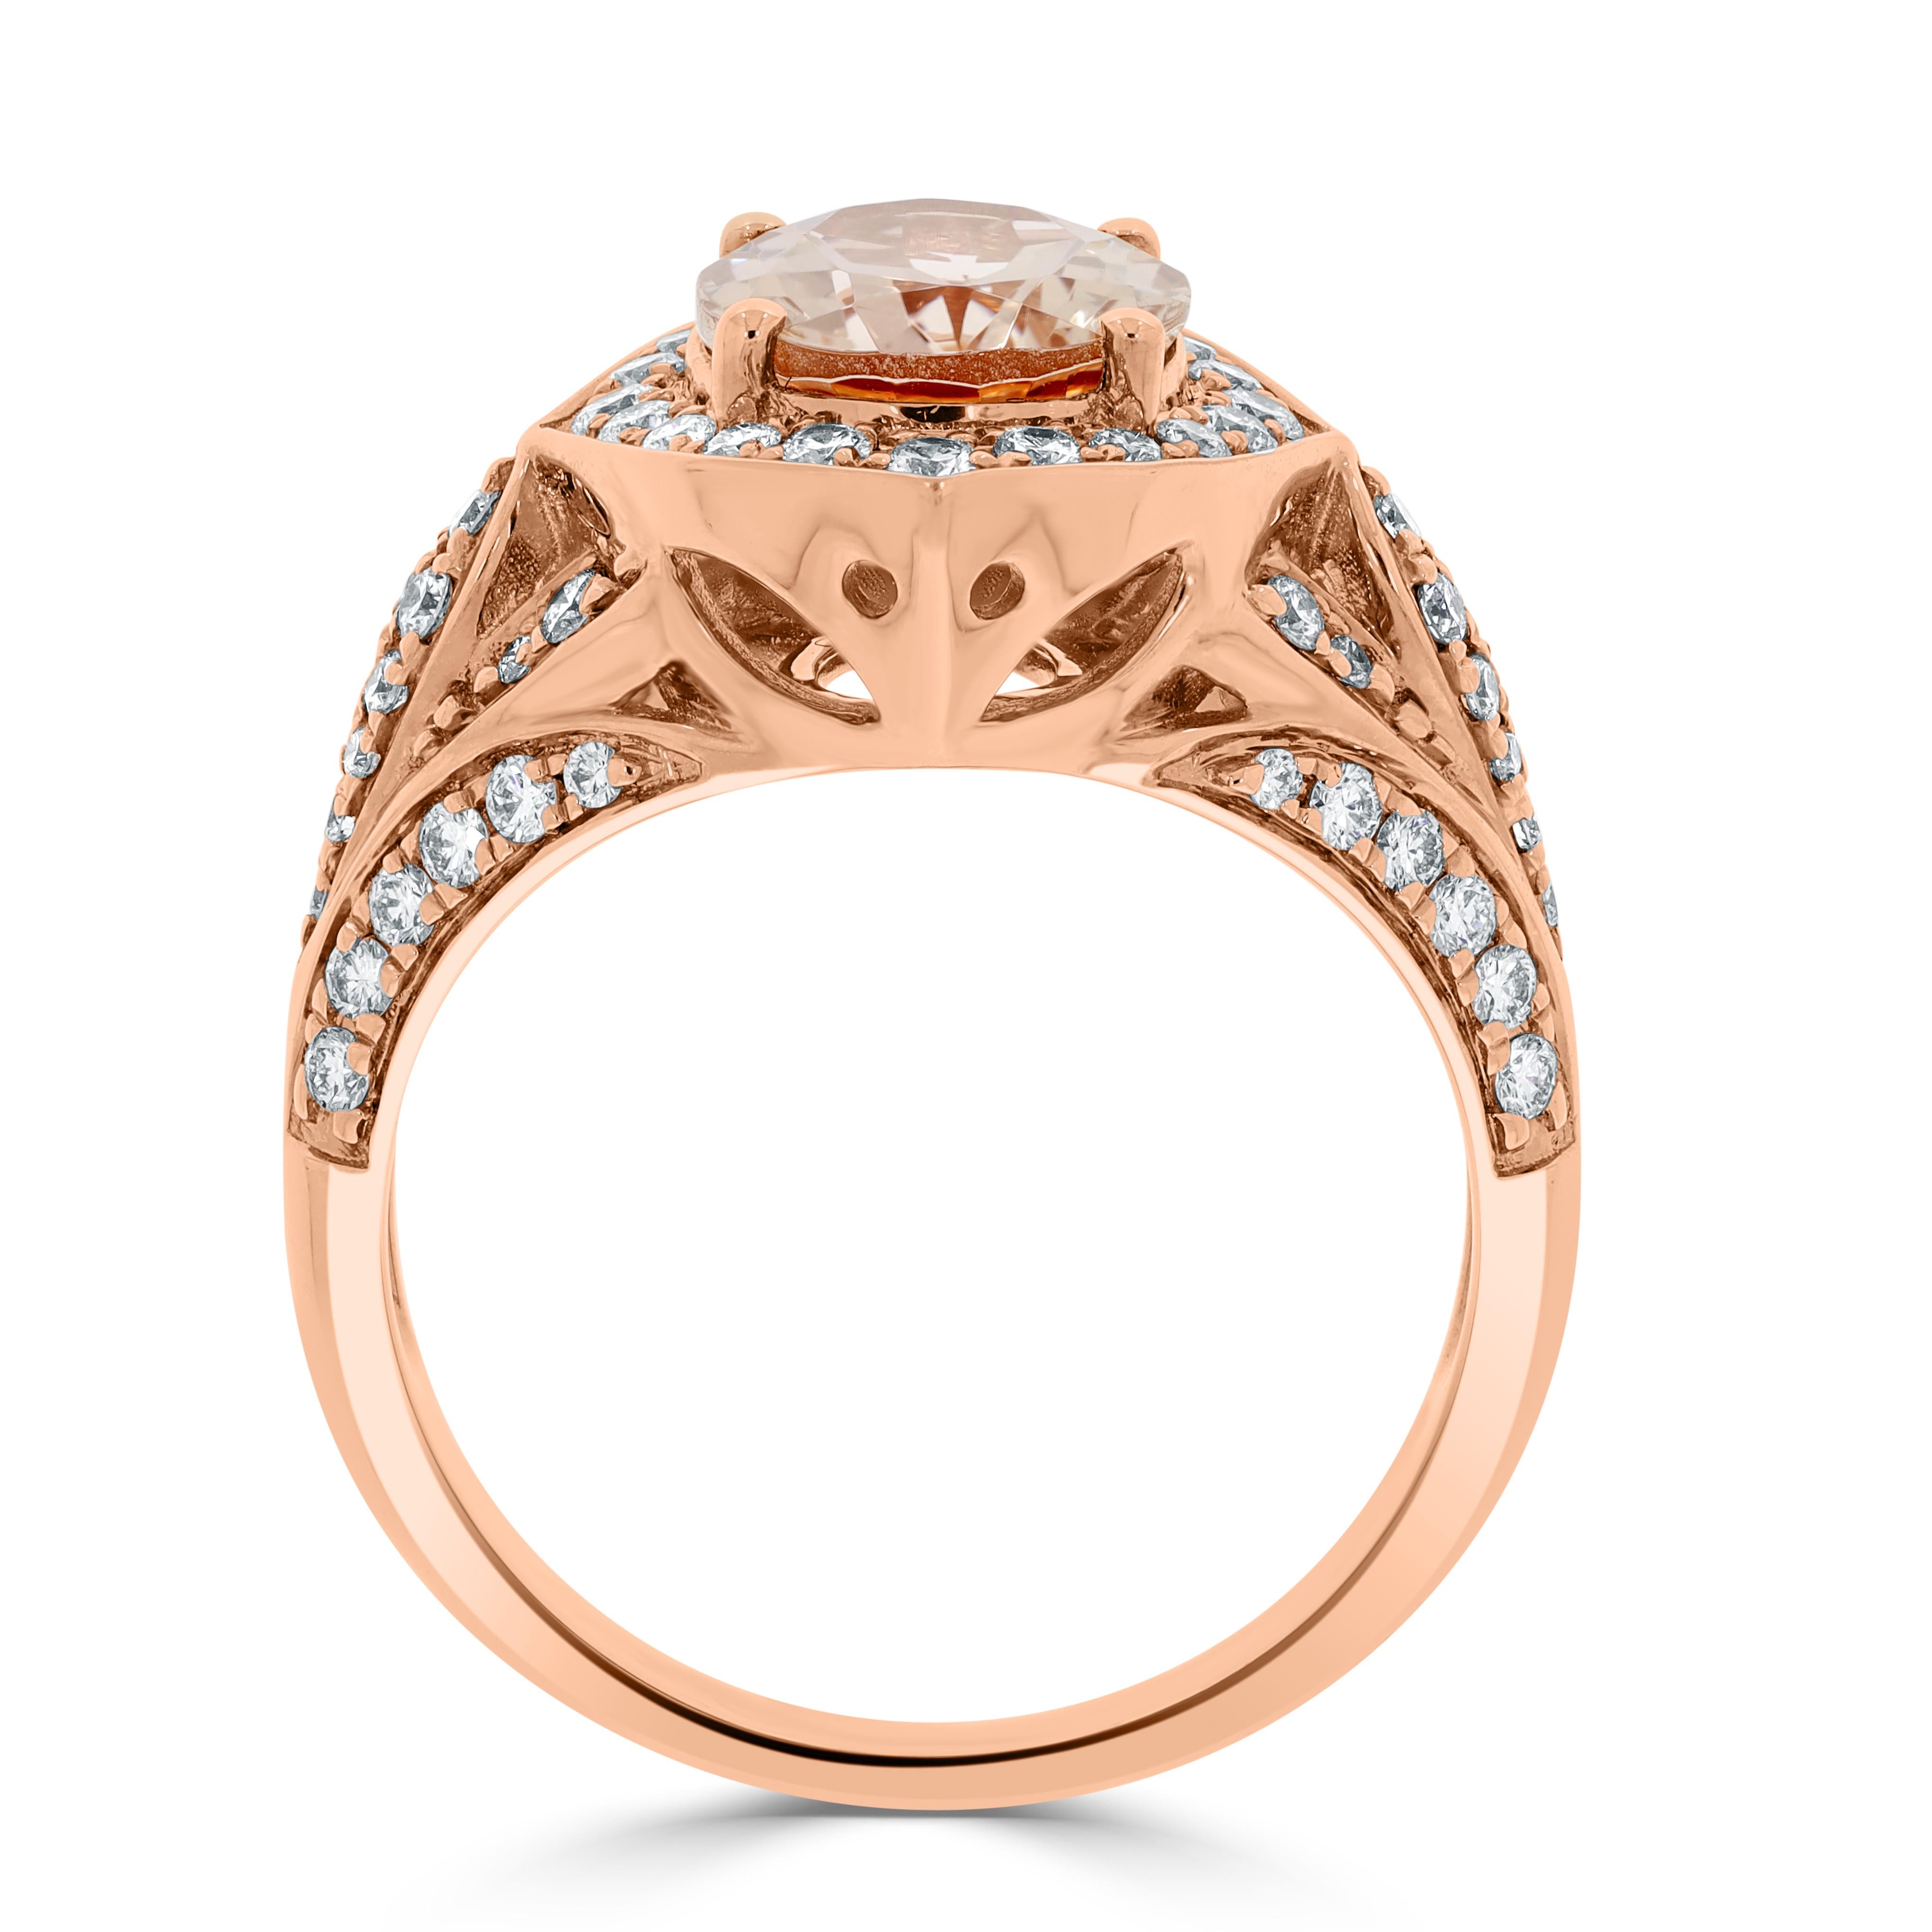 This ring is designed to exude a luxe feel and steal the spotlight. Styled to perfection with 14kt rose gold and studded with round Diamonds, the oval-cut Morganite being its specialty!